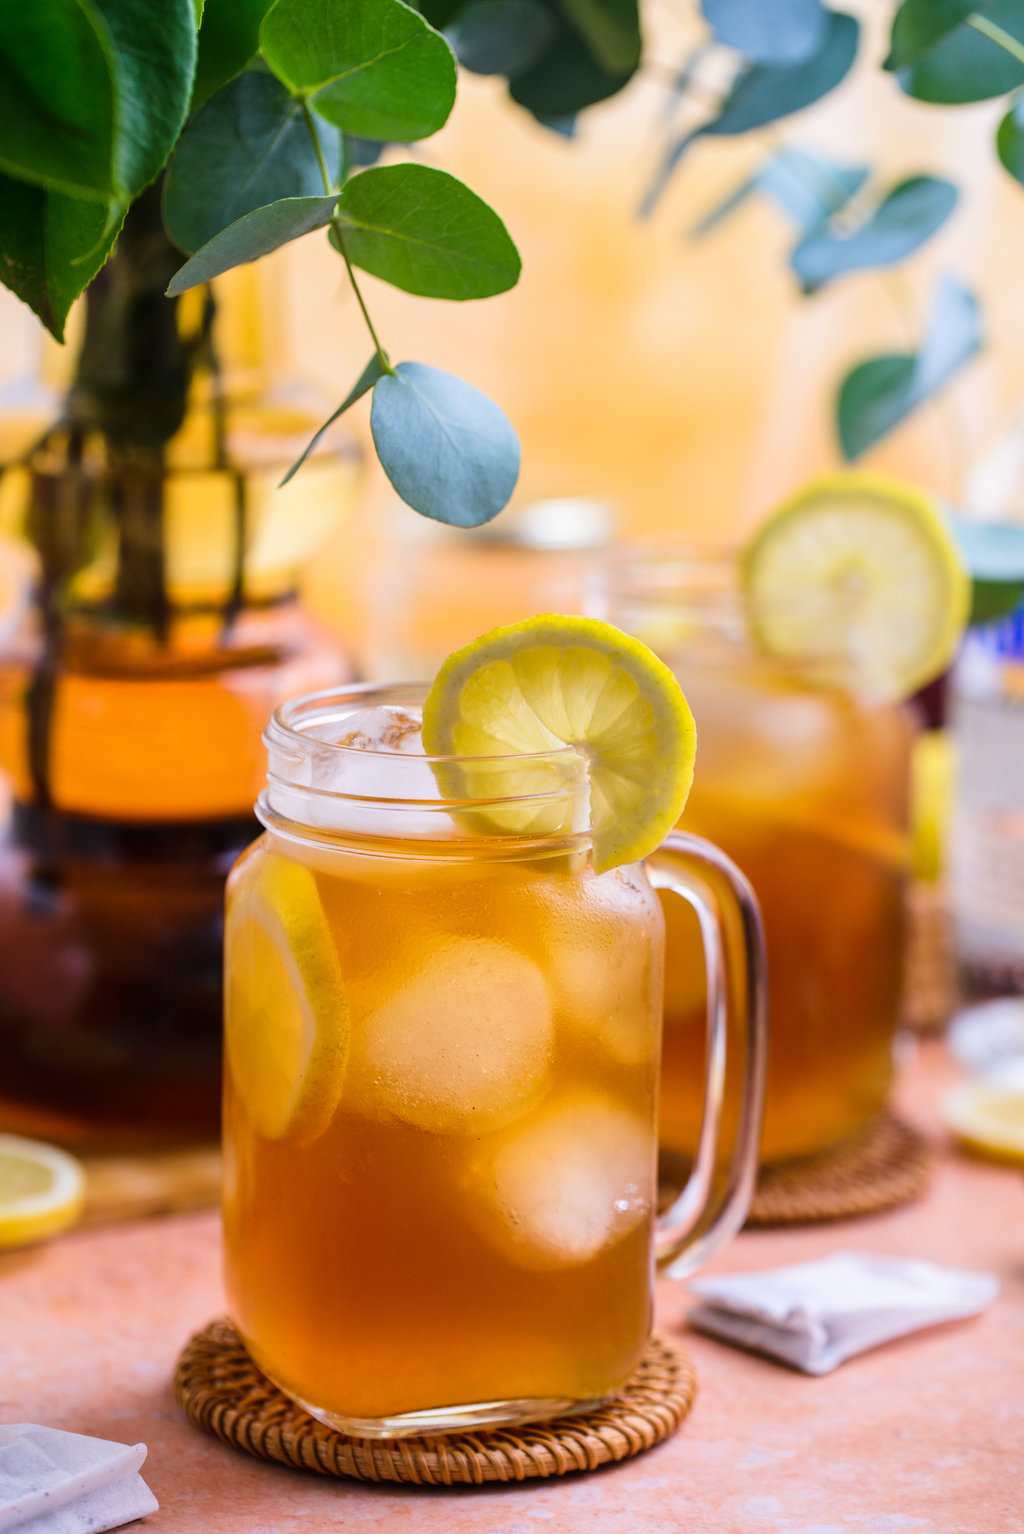 Indulge in the ultimate thirst-quencher, a Spiked Arnold Palmer cocktail that combines the best of both worlds: sweet tea and tangy lemonade.